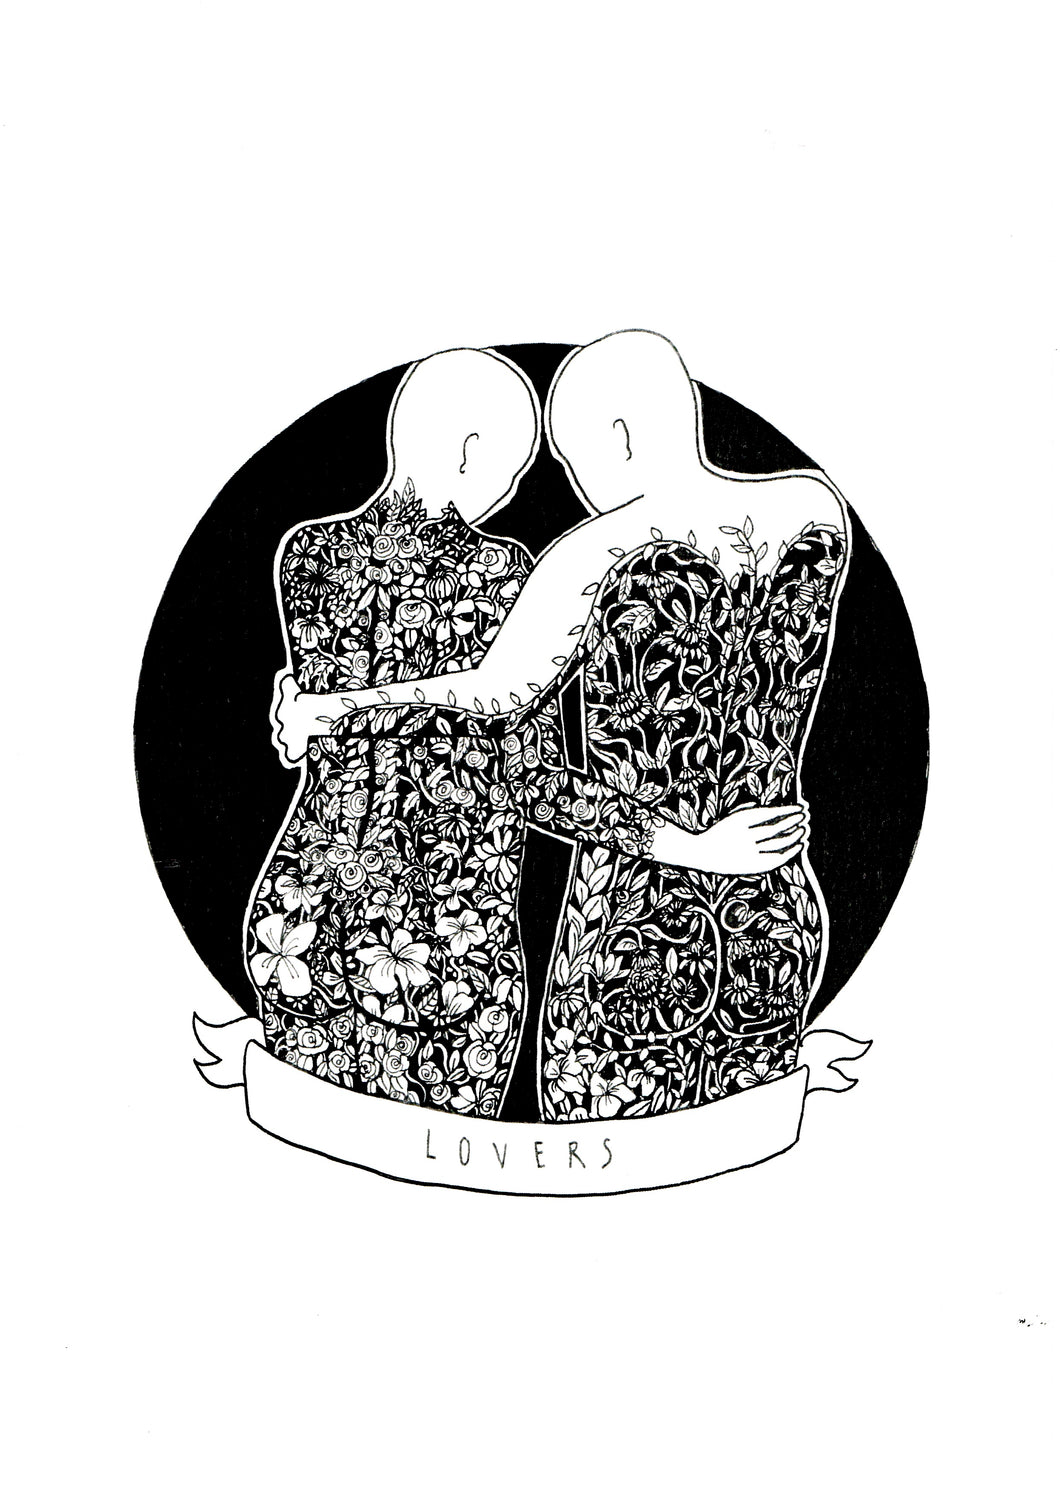 Lovers (A4 Print)